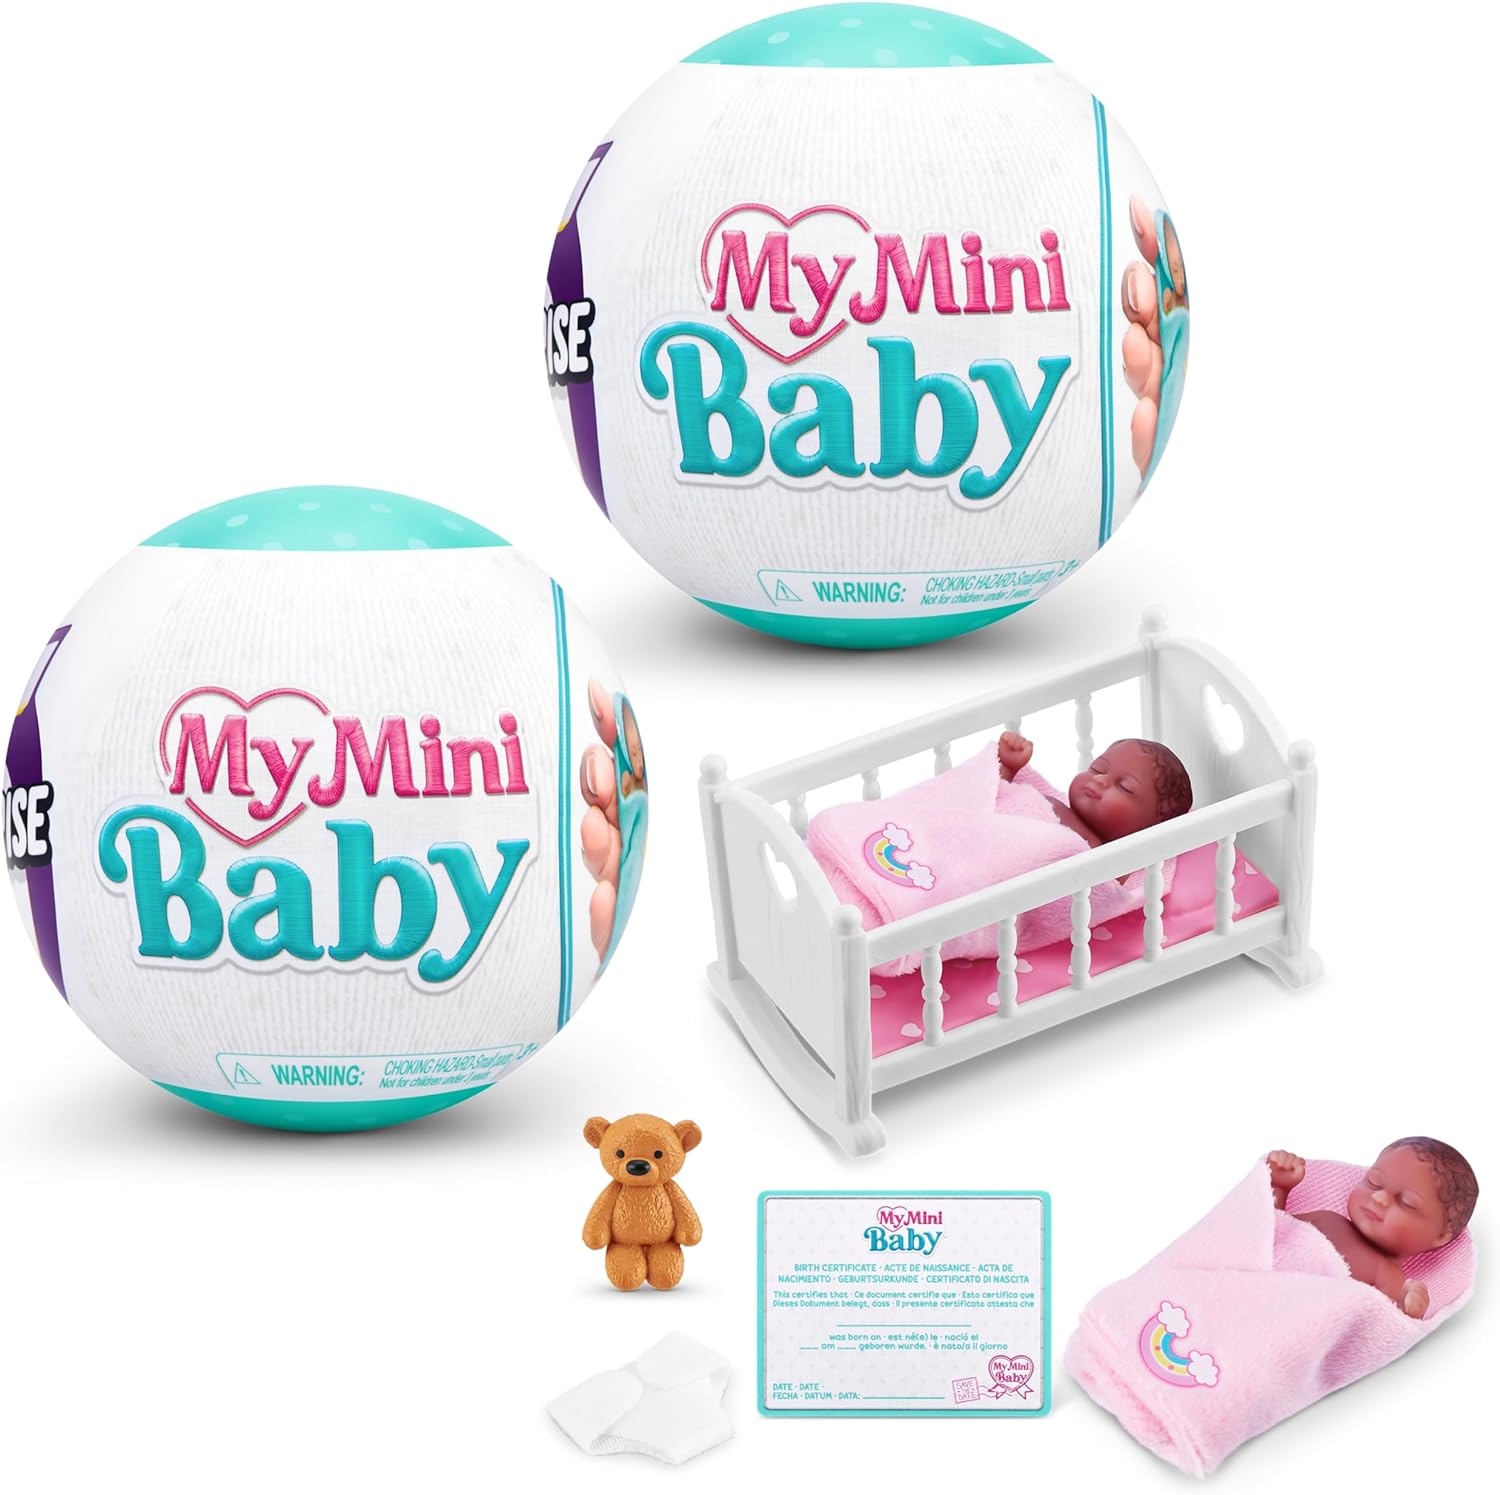 Mini Brands My Mini Baby is coming to stores soon!!! flexible and